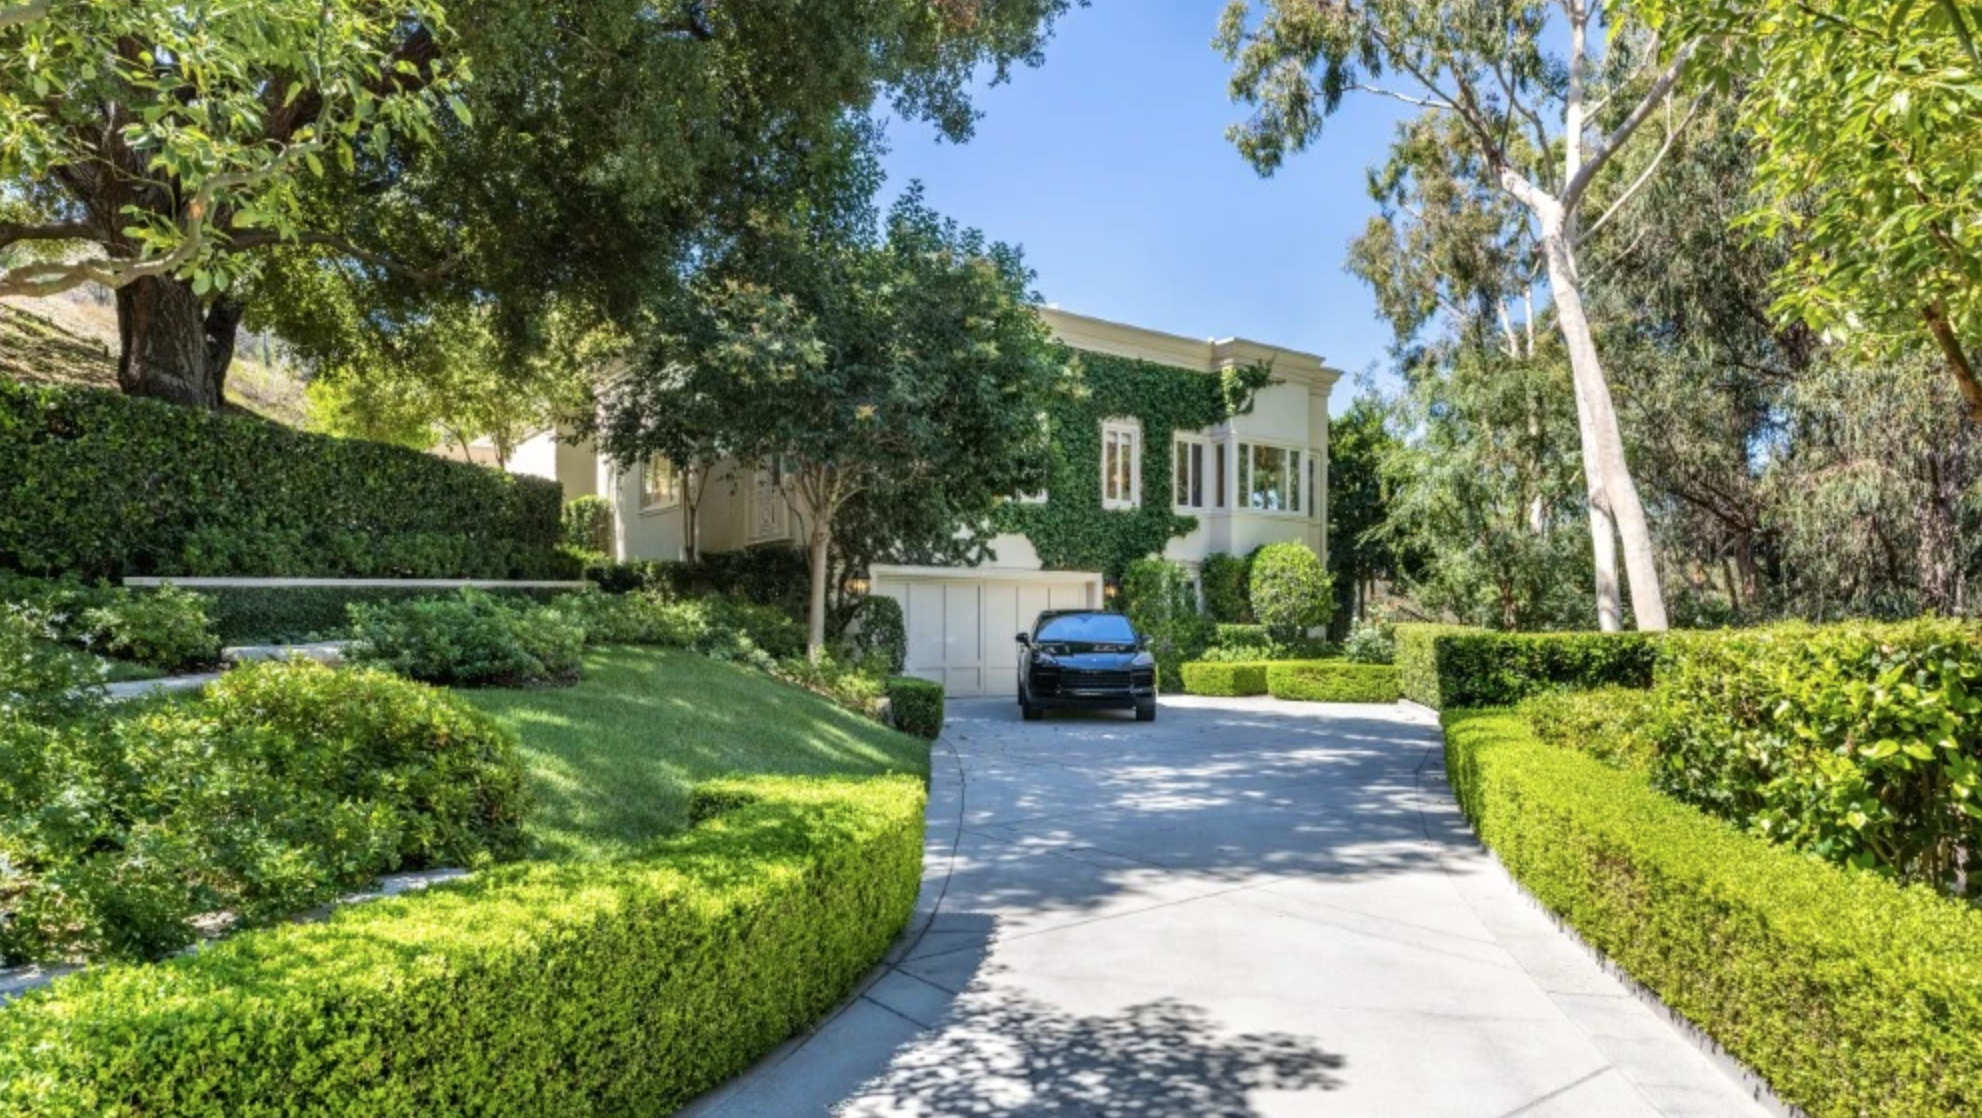 Katy Perry is Giving Up Her L.A. Mansion for $19.5 Million